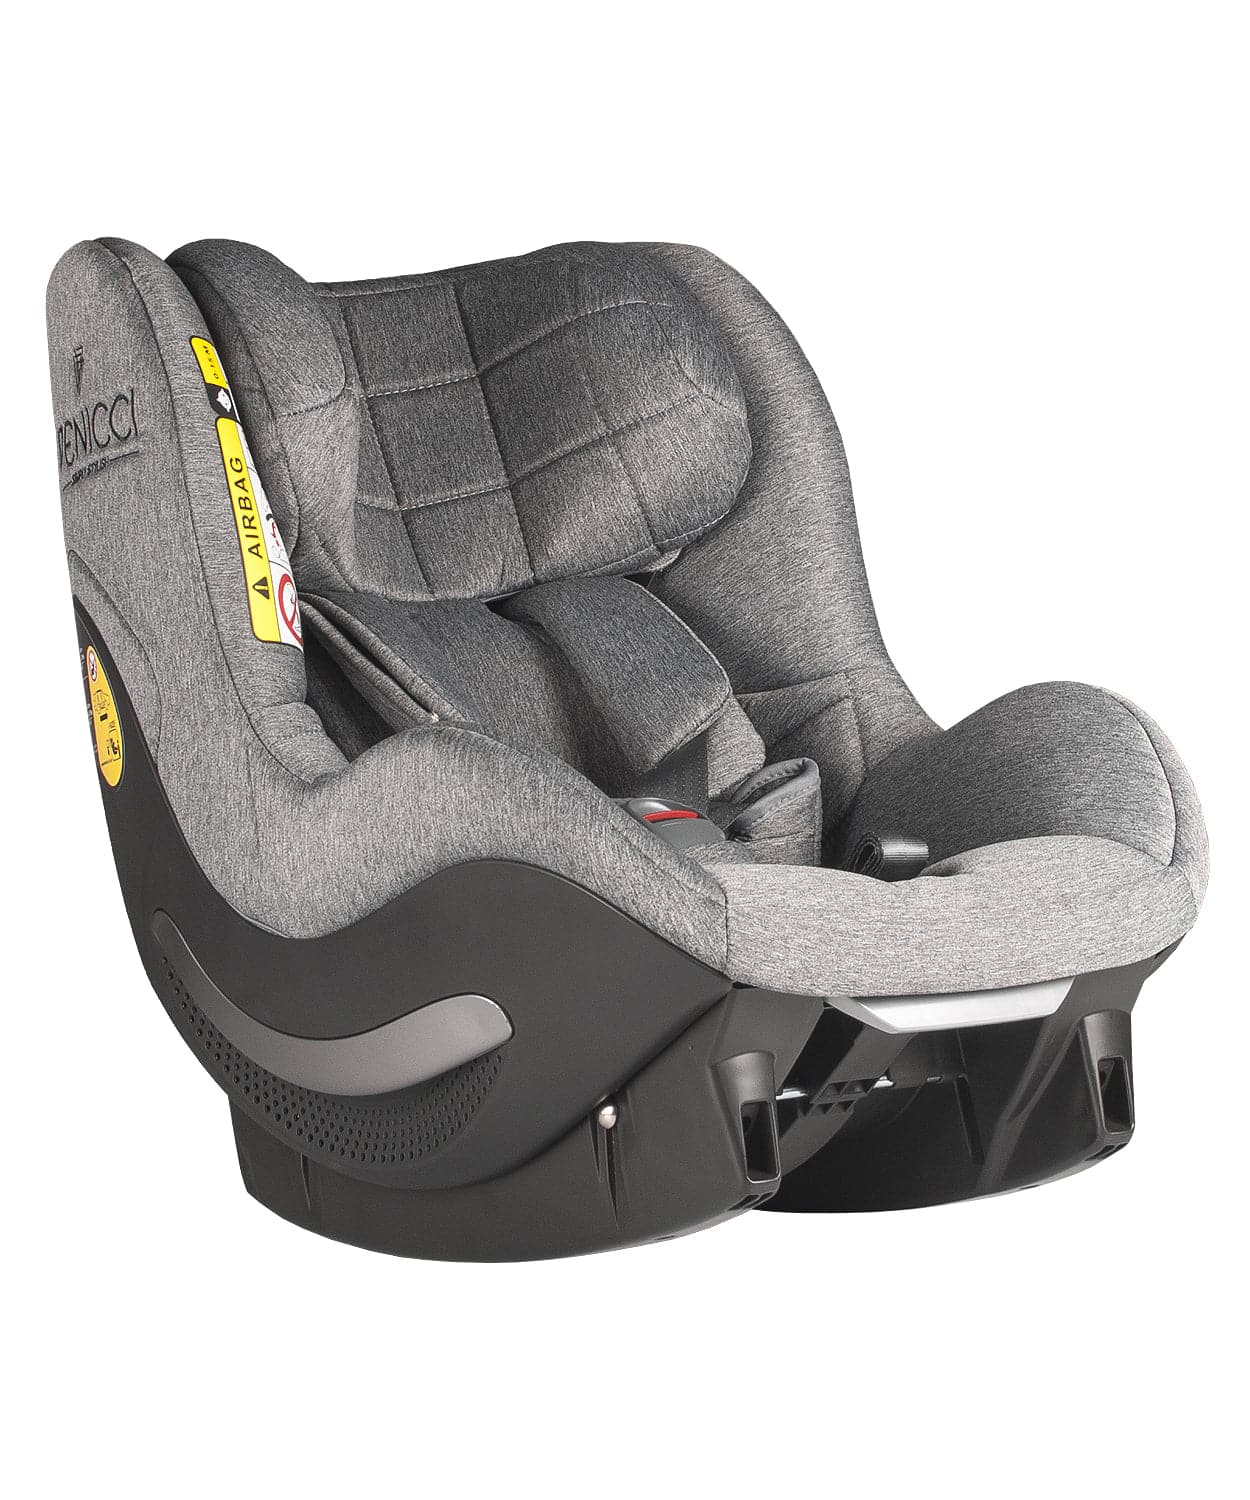 Venicci iSize Aerofix Car Seat - Grey -  | For Your Little One